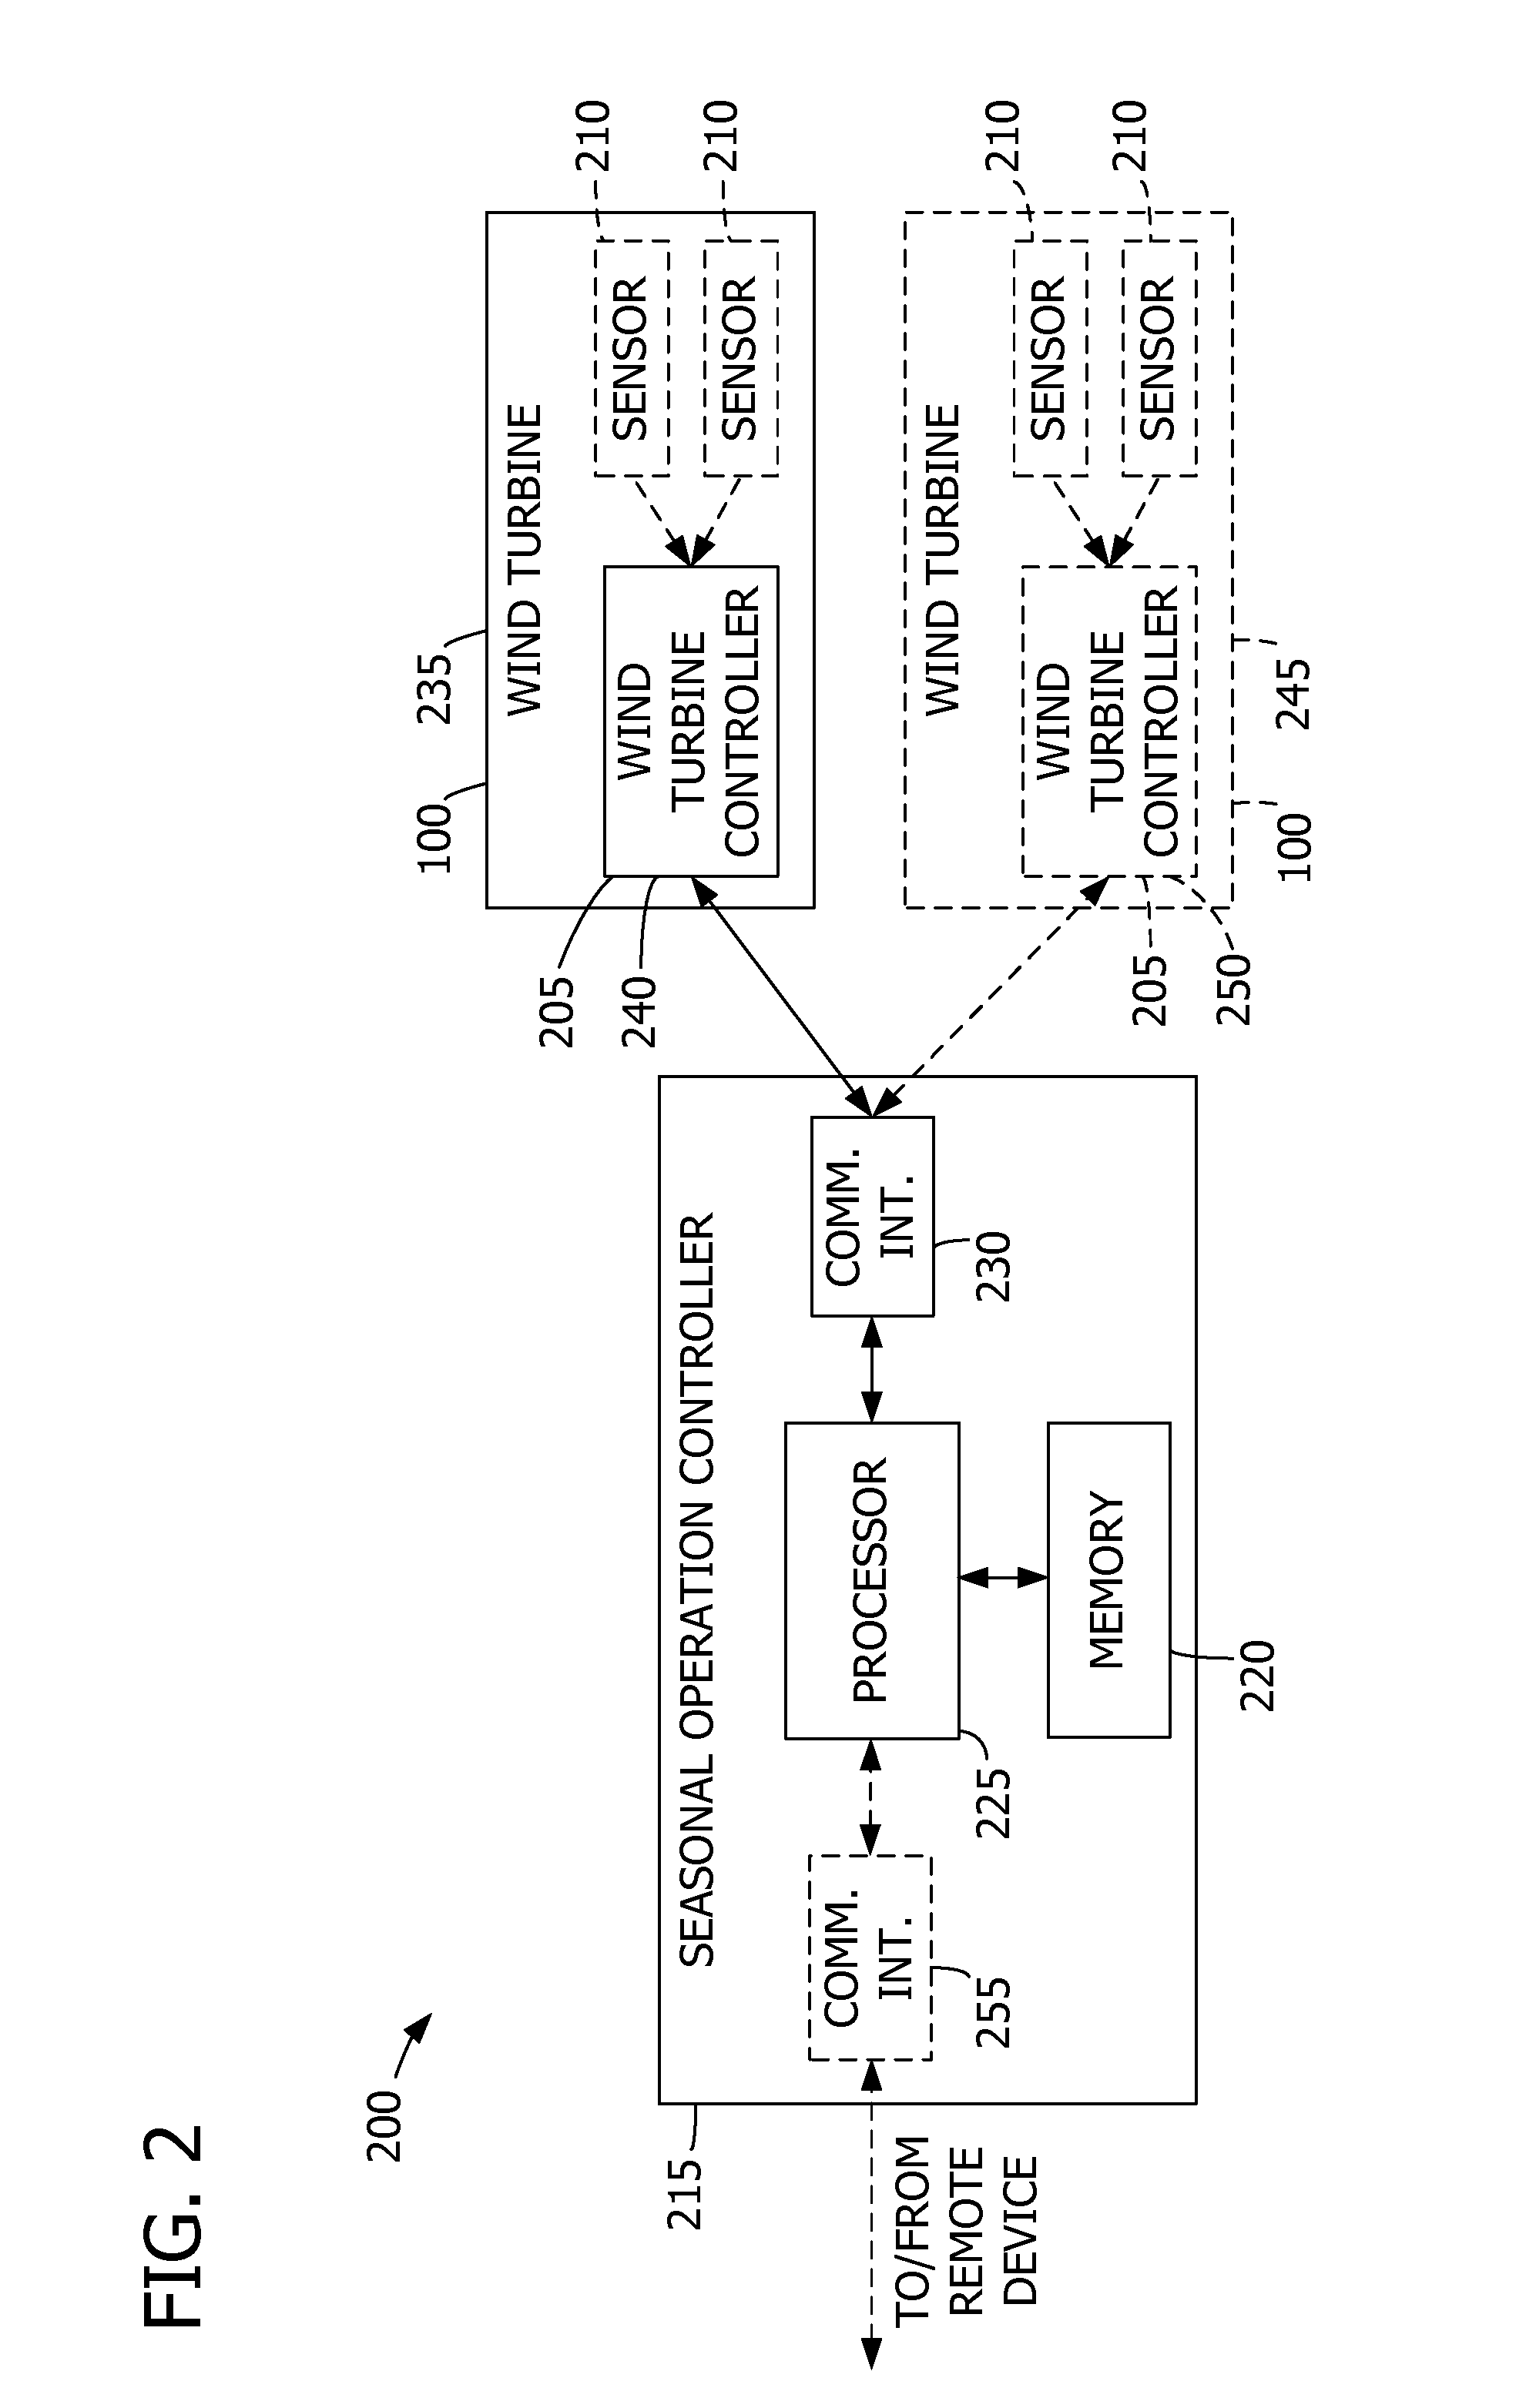 System, device, and method for controlling a wind turbine using seasonal parameters